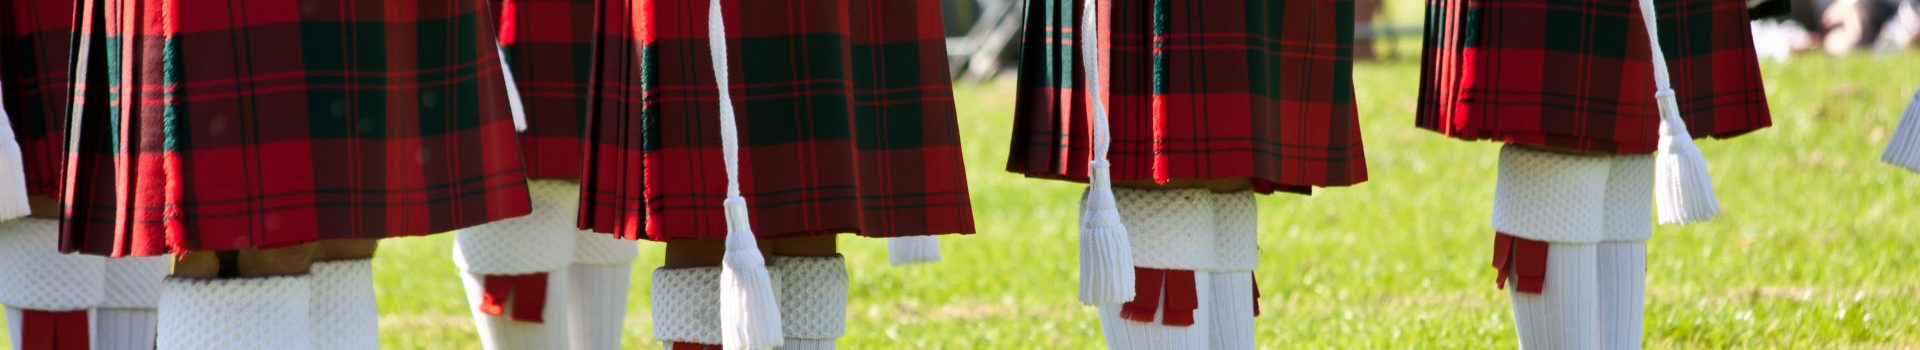 Pipers at the Highland Games, Scotland